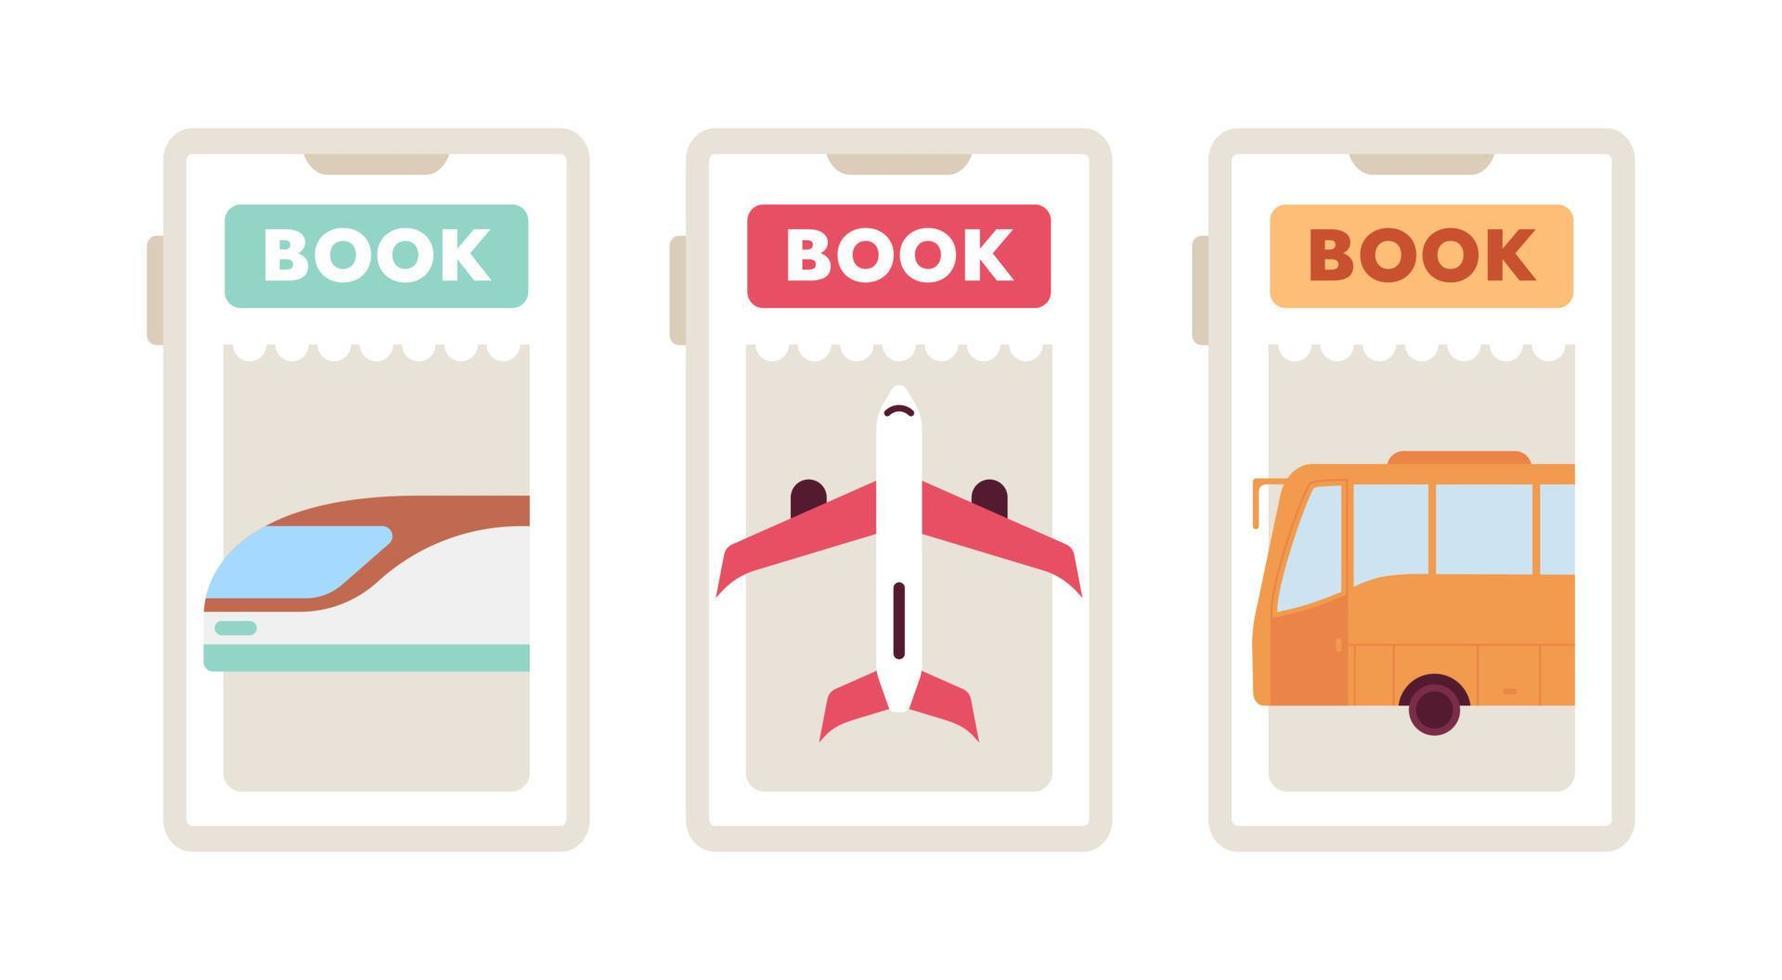 Booking bus, train, plane tickets app flat concept vector spot illustration set. Editable 2D cartoon objects on white for web UI design. Reservation creative hero image pack